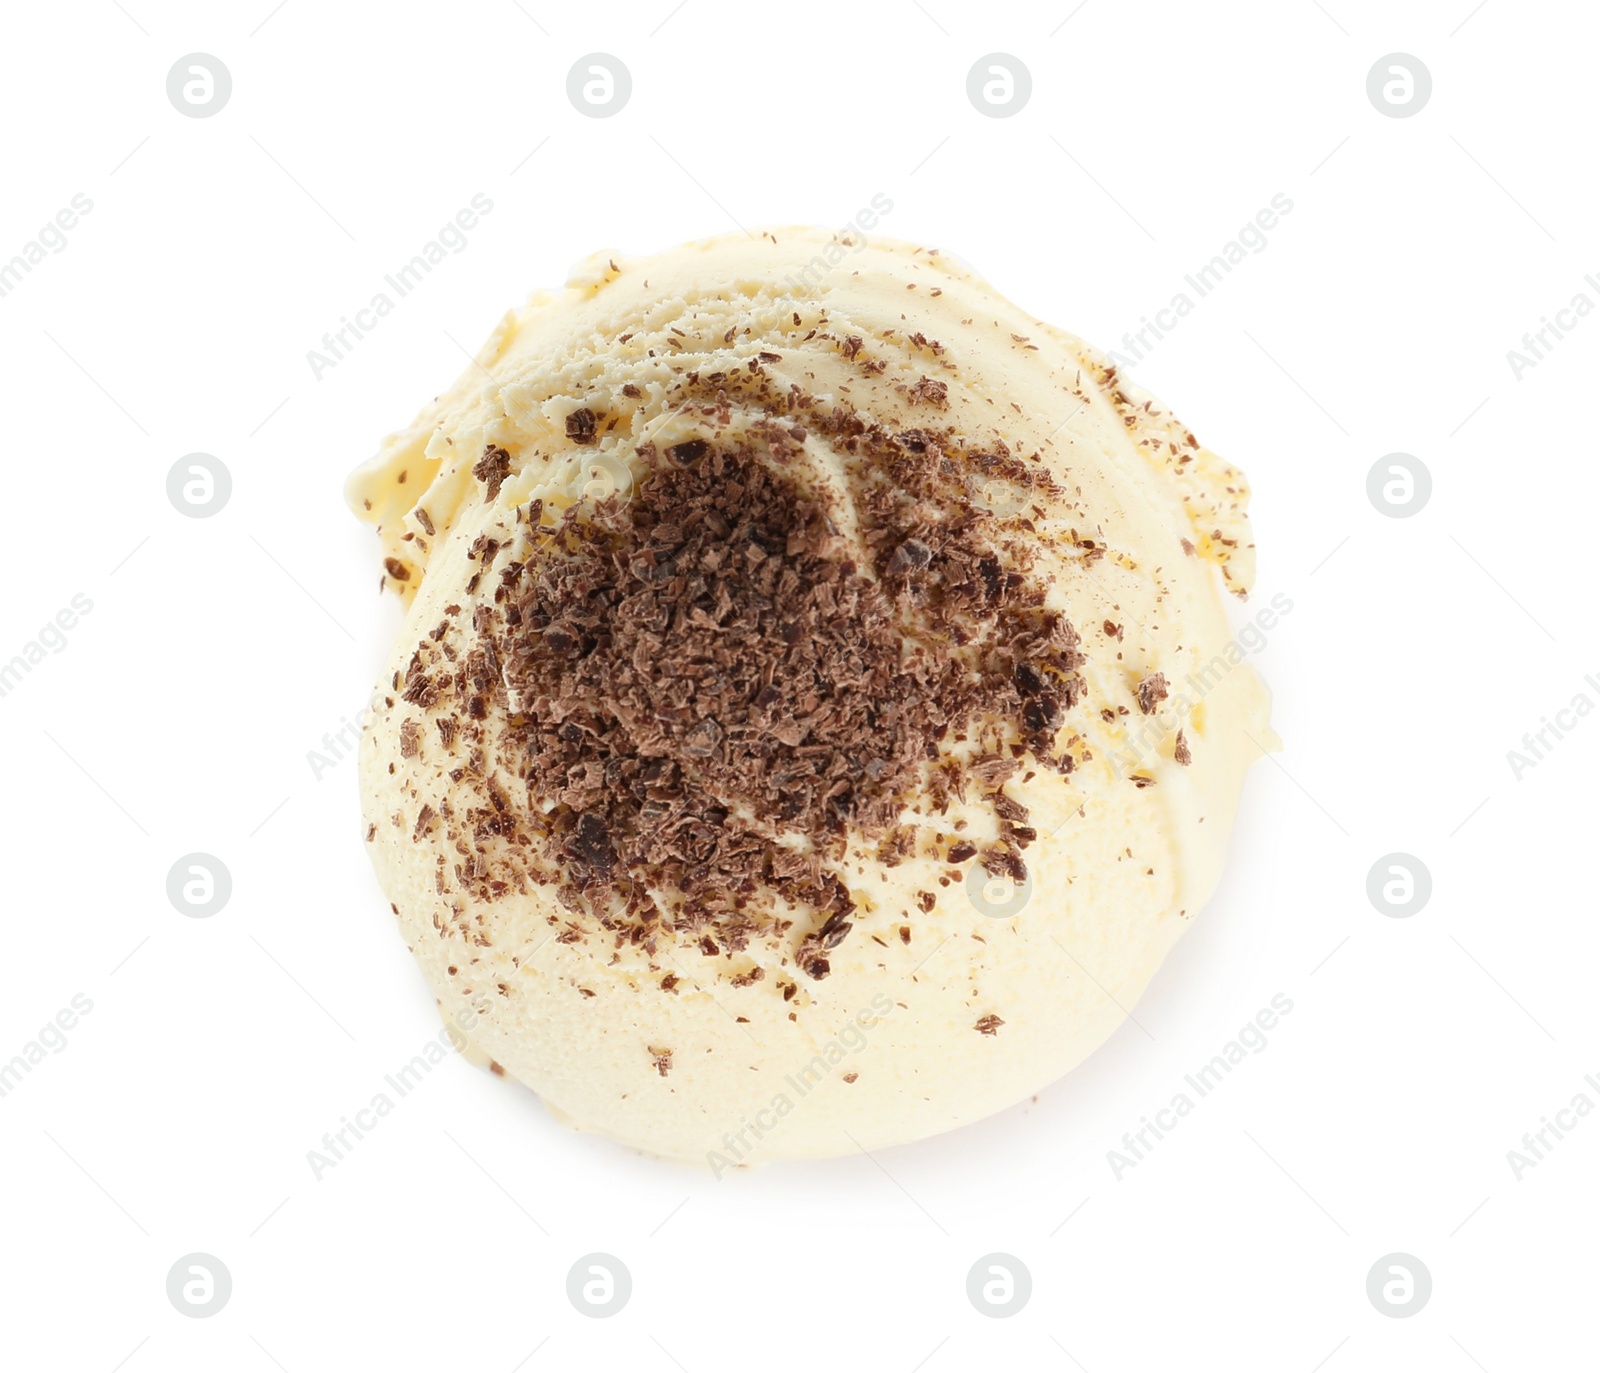 Photo of Delicious banana ice cream with chocolate crumbs isolated on white, top view